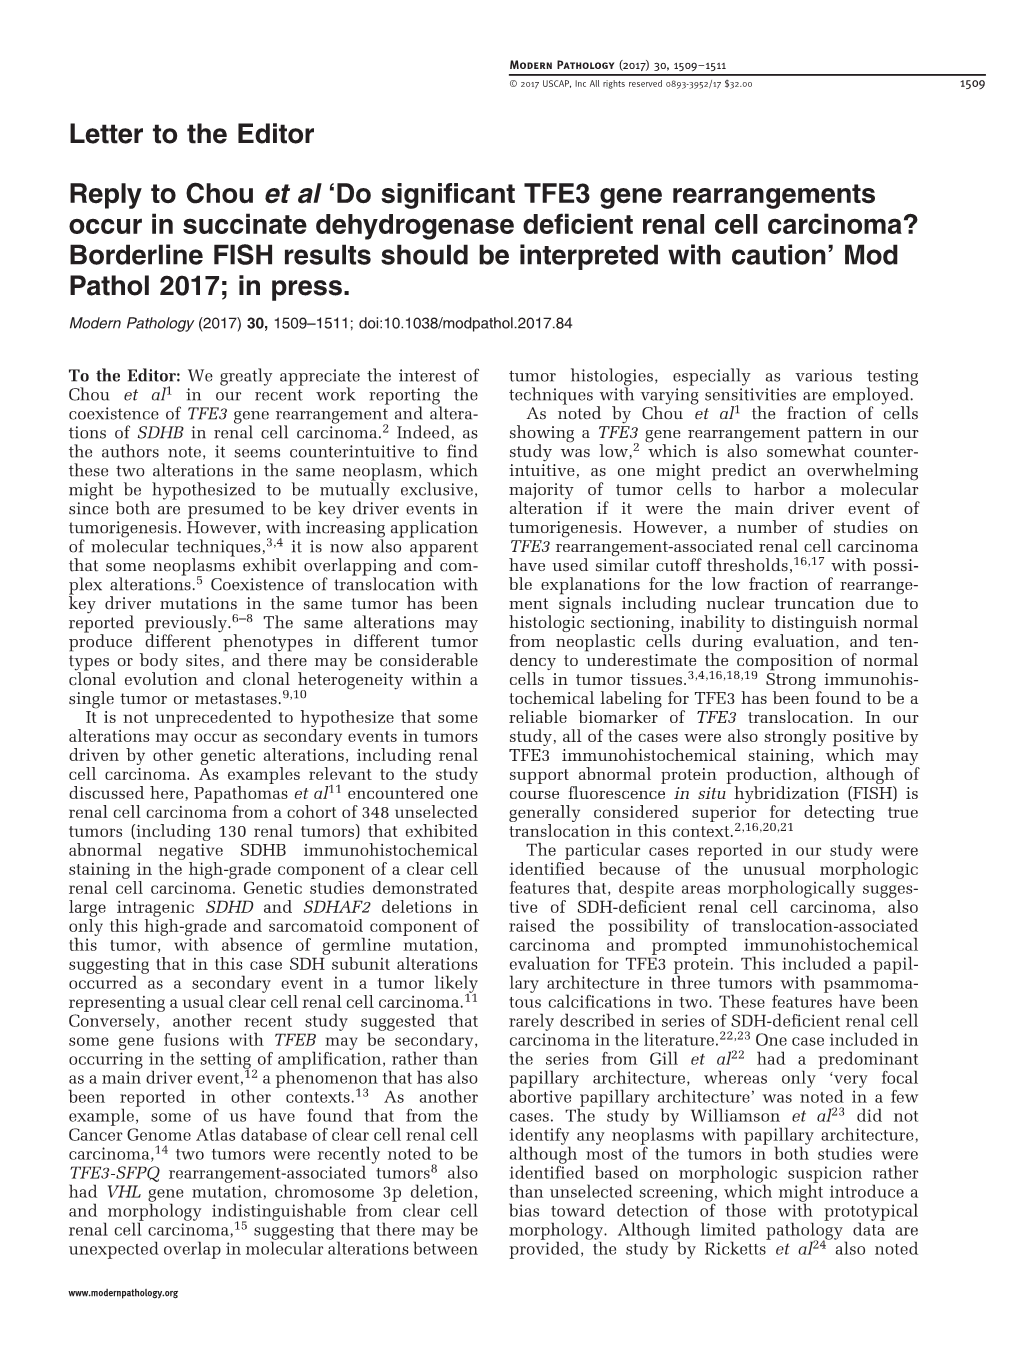 Reply to Chou Et Al 'Do Significant TFE3 Gene Rearrangements Occur